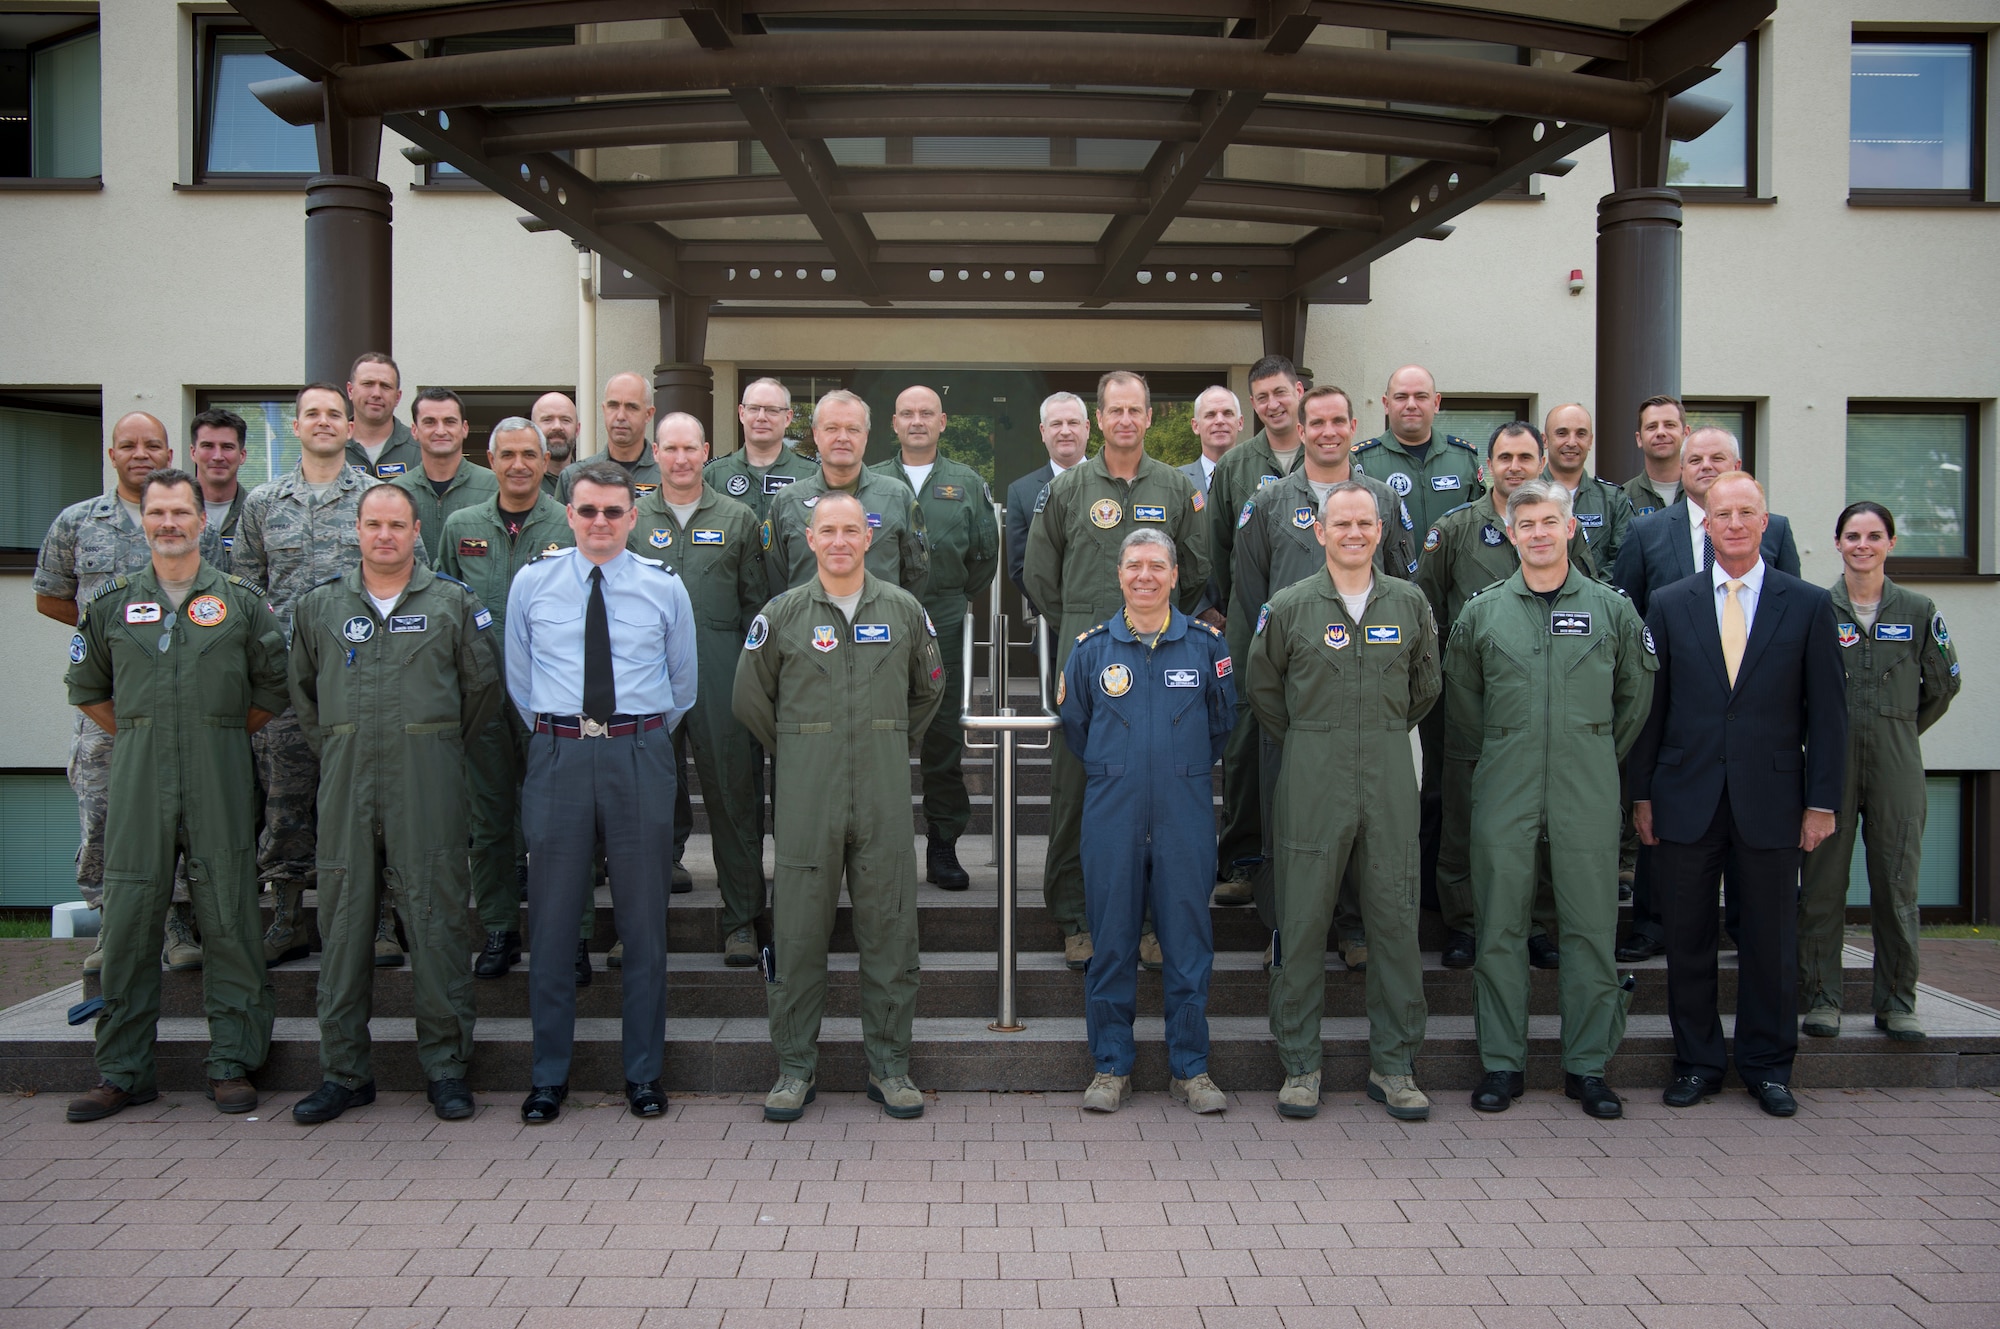 A group of general officers representing the U.S. and each of the seven European and Mediterranean nations, which will operate the F-35 lightning II aircraft pose for a photo on Ramstein, Sep. 6, 2018. The group met to discuss the F-35's implementation in Europe. Topics included establishing infrastructure, lowering procurement and maintenance costs, and basing aircraft on RAF Lakenheath, England. (U.S. Air Force photo by Senior Airman Elizabeth Baker)